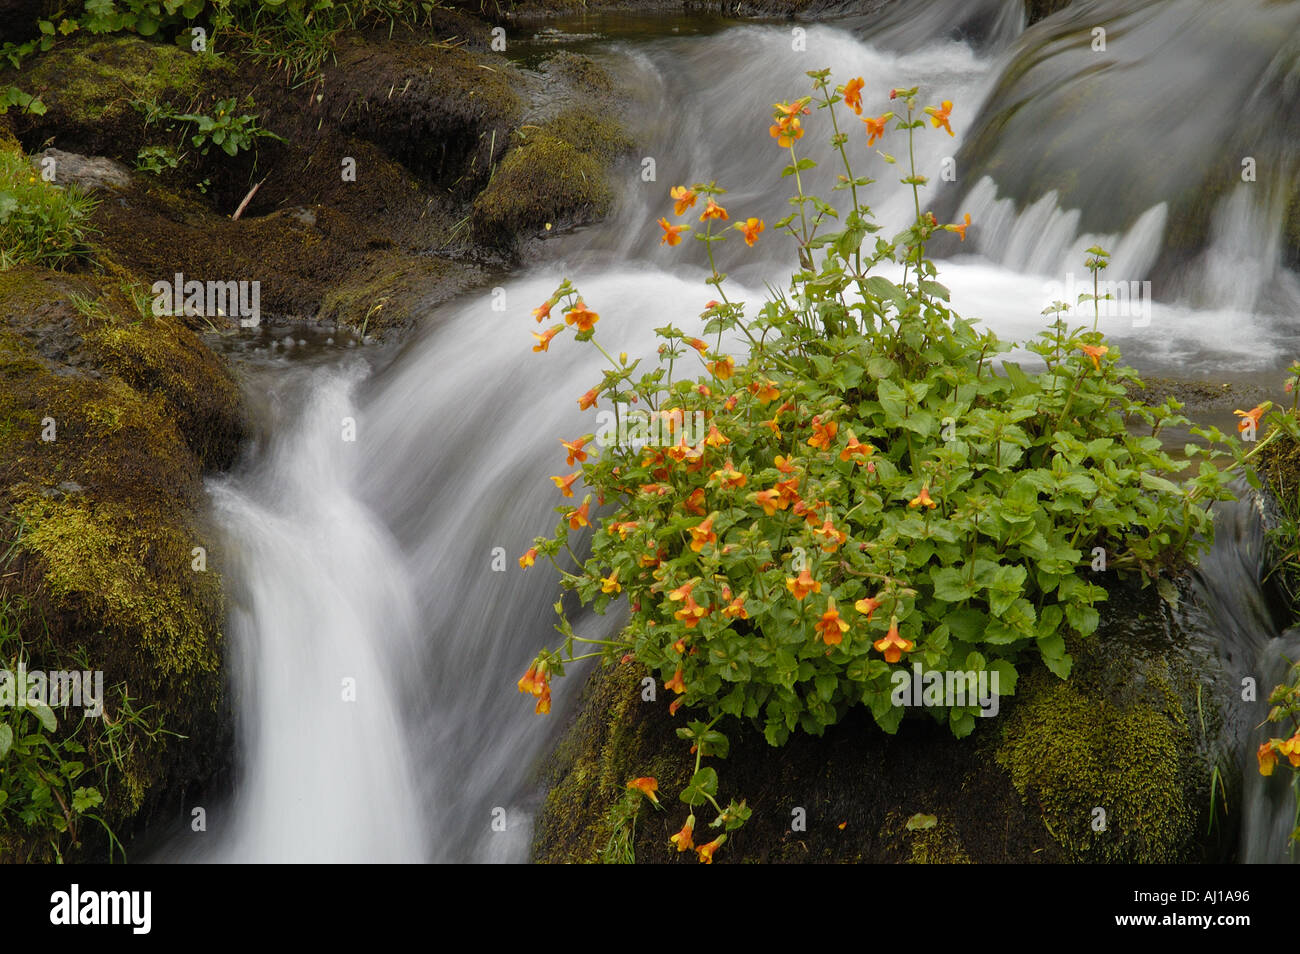 detail of a stream with flowers Faeroe Islands Stock Photo